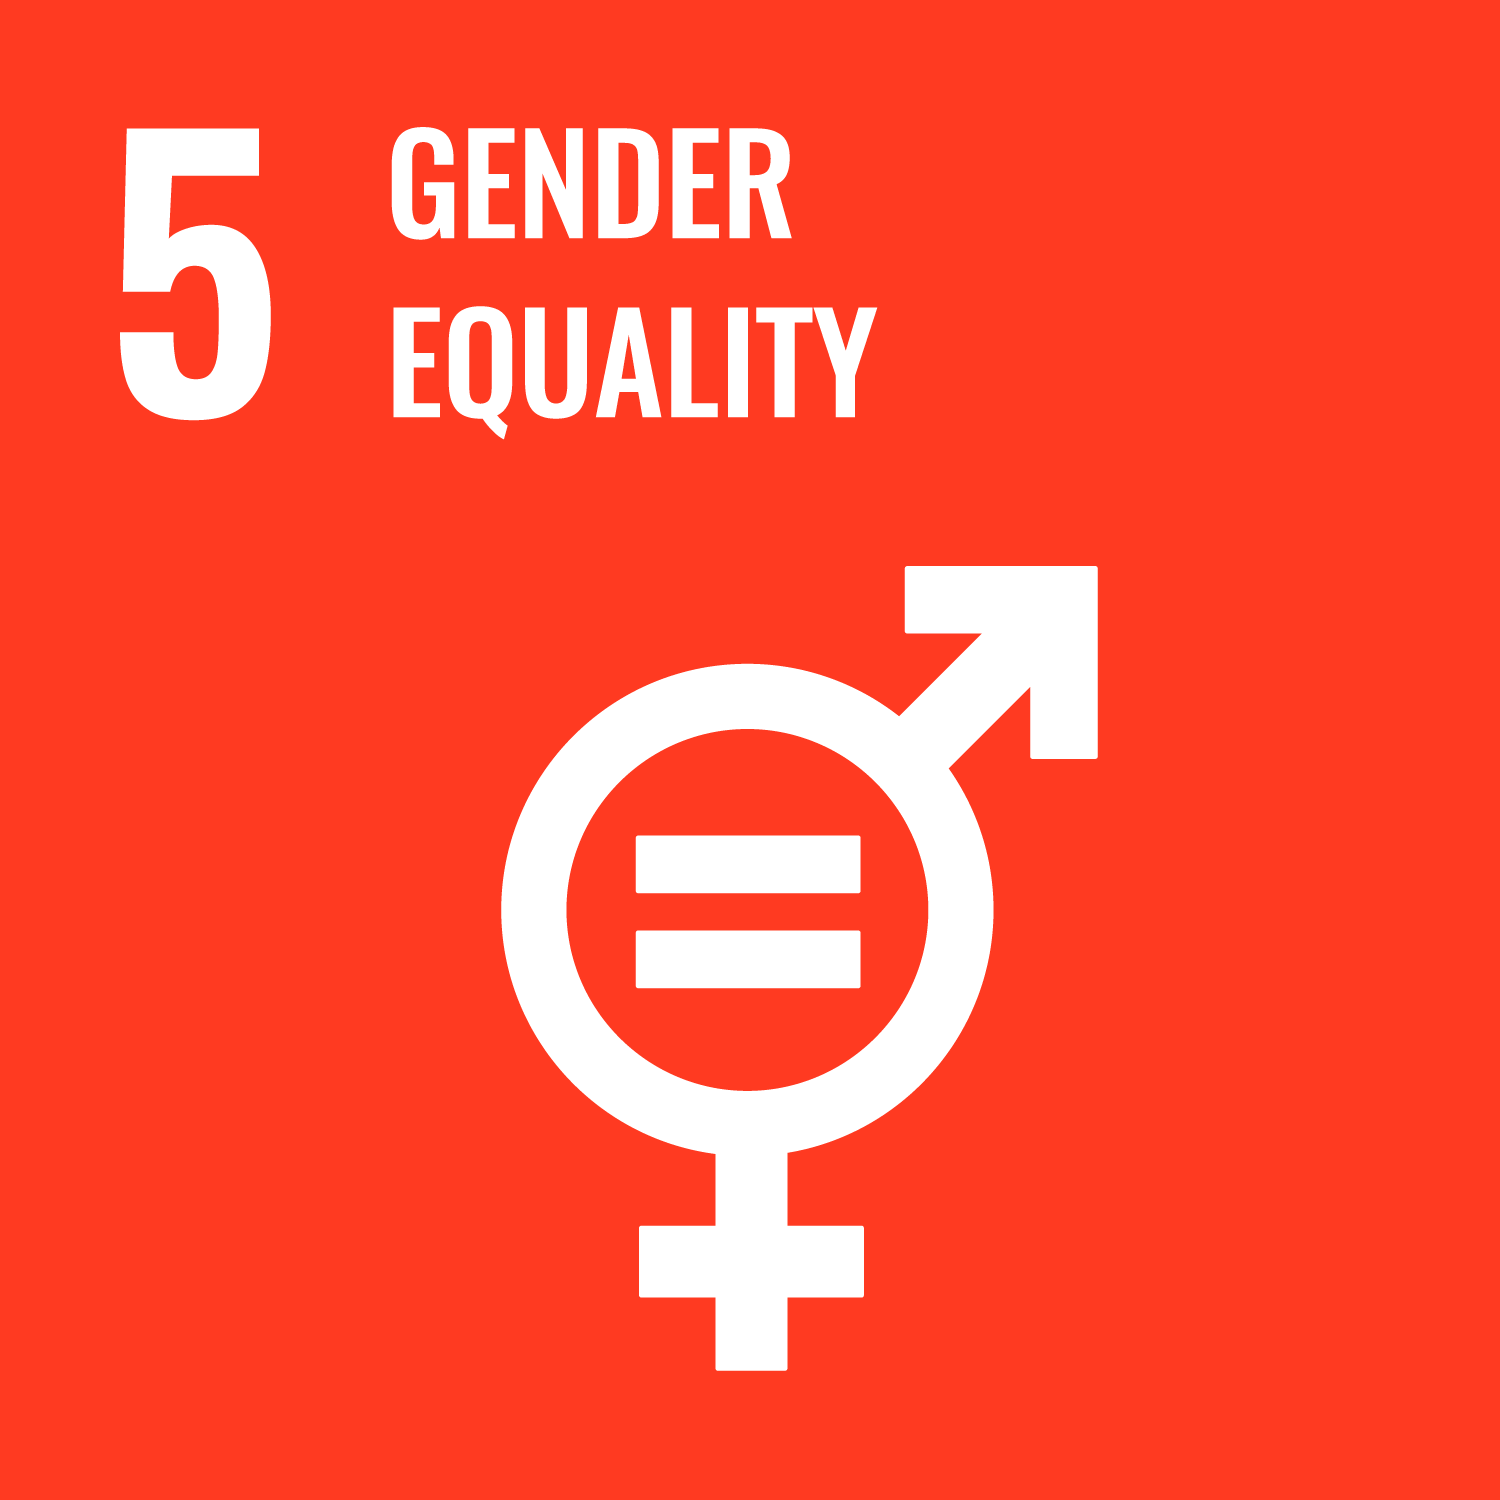 UN Sustainable Development Goal 5 - Gender Equality